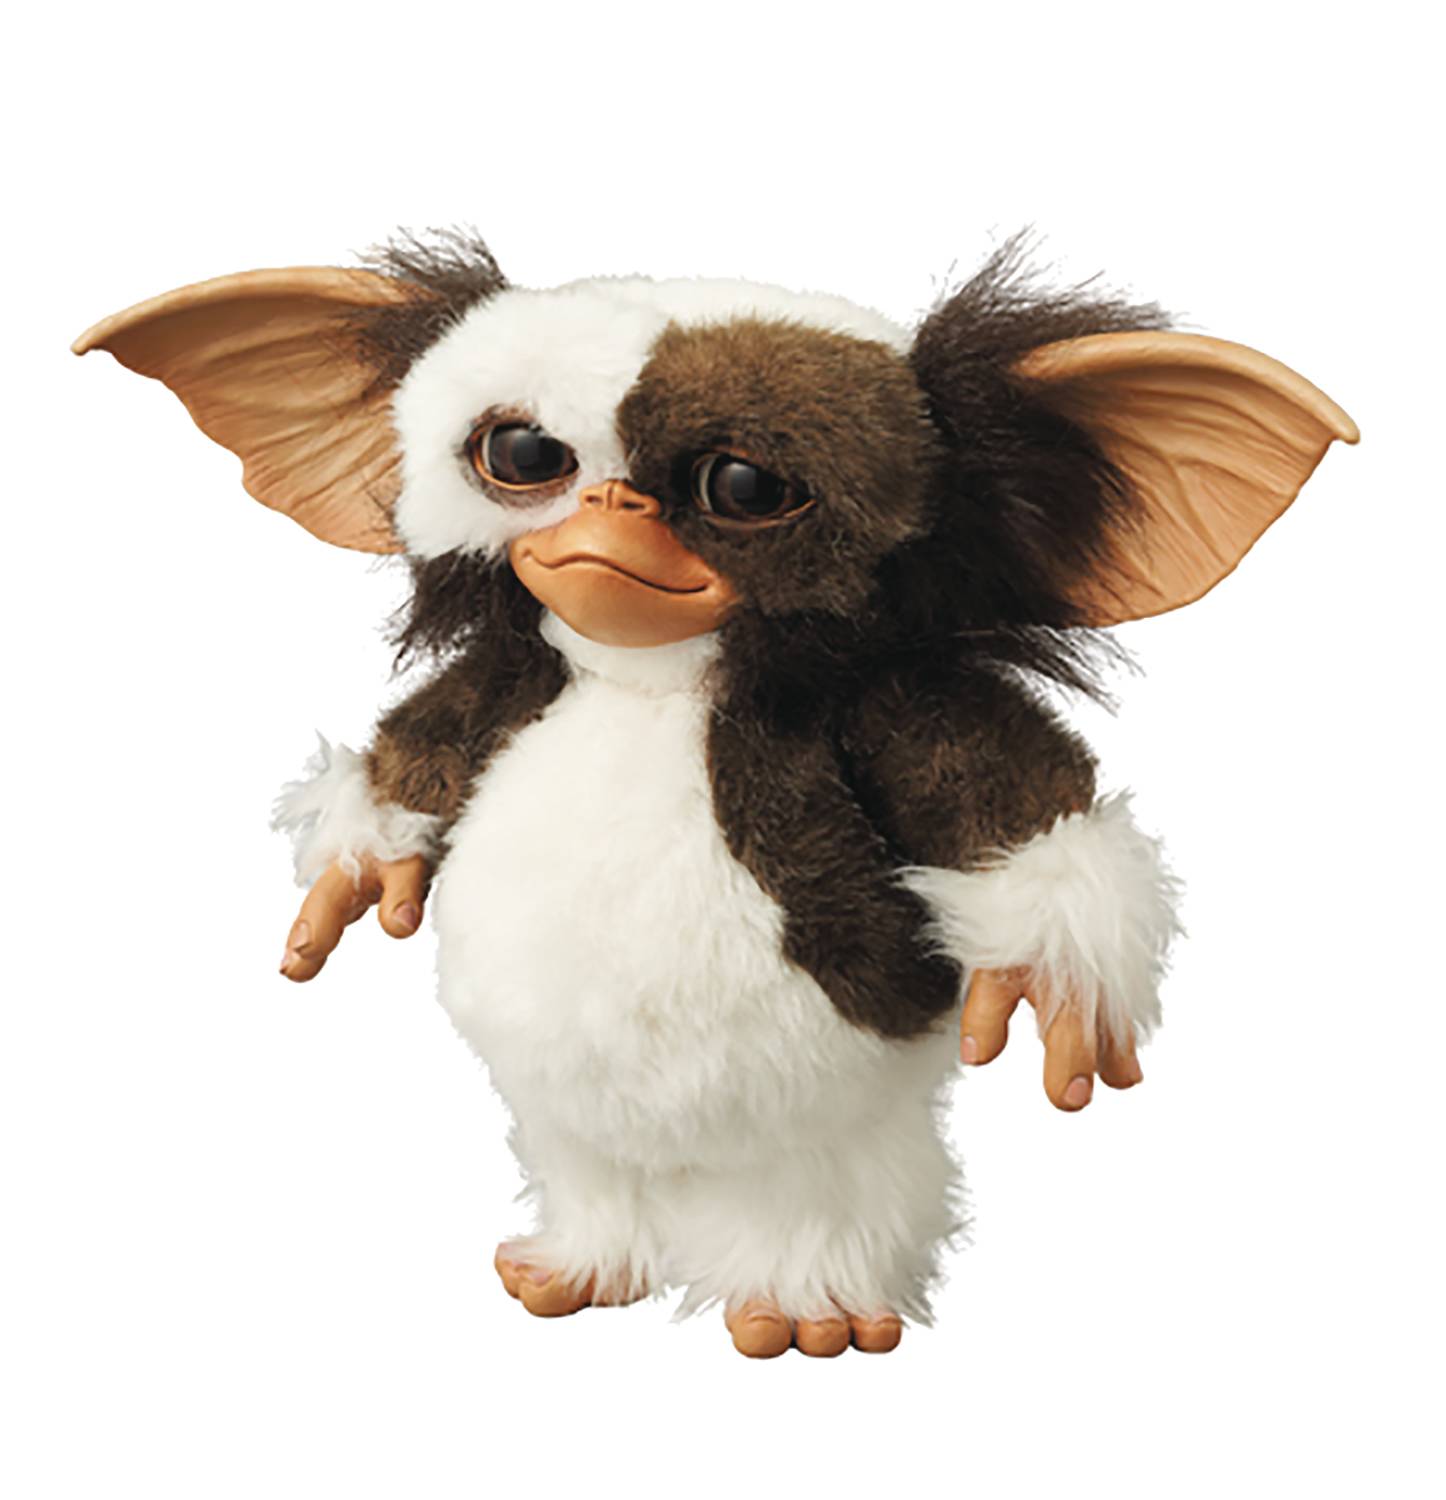 Medicom Toyis proud to presetnt the Gizmo 3D Glasses Version VCD figure fro...